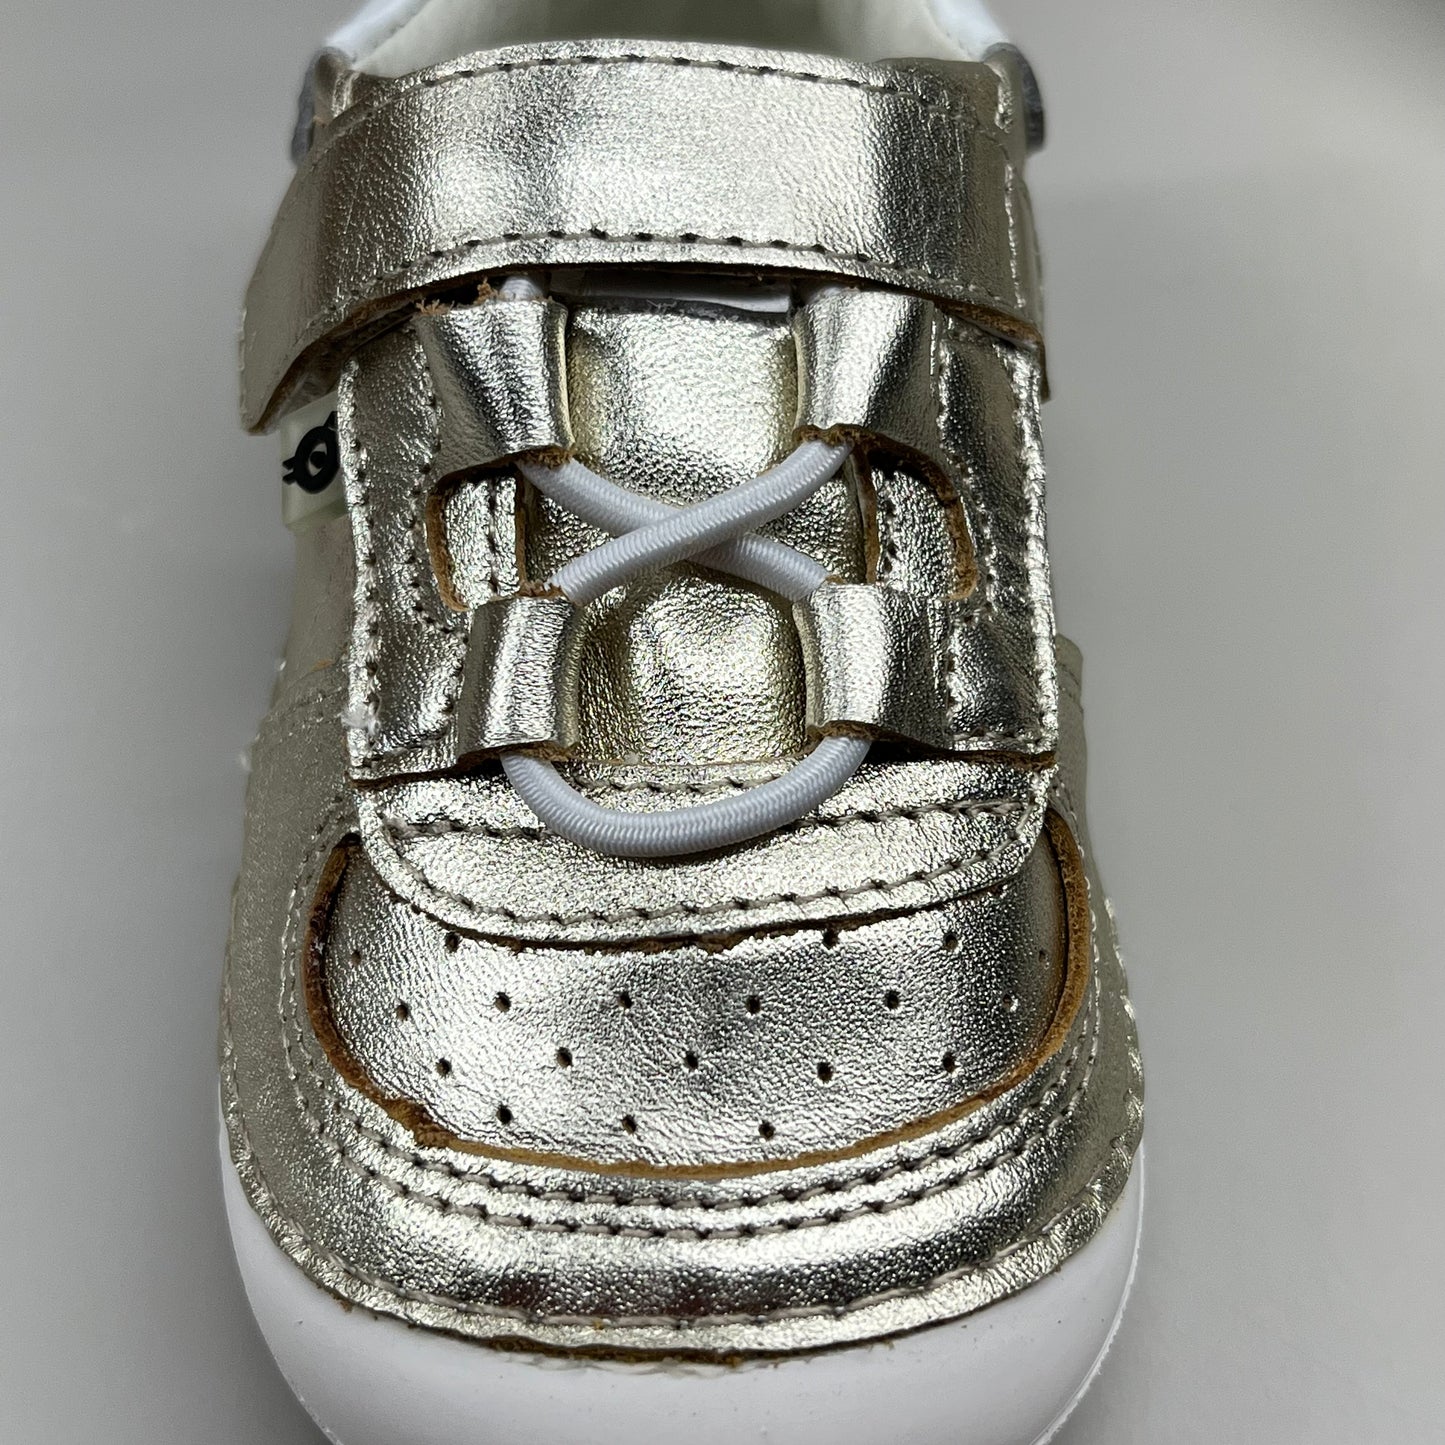 OLD SOLES Baby Rebel Pave Leather Shoe Sz 21 US 5 Gold/White #4090